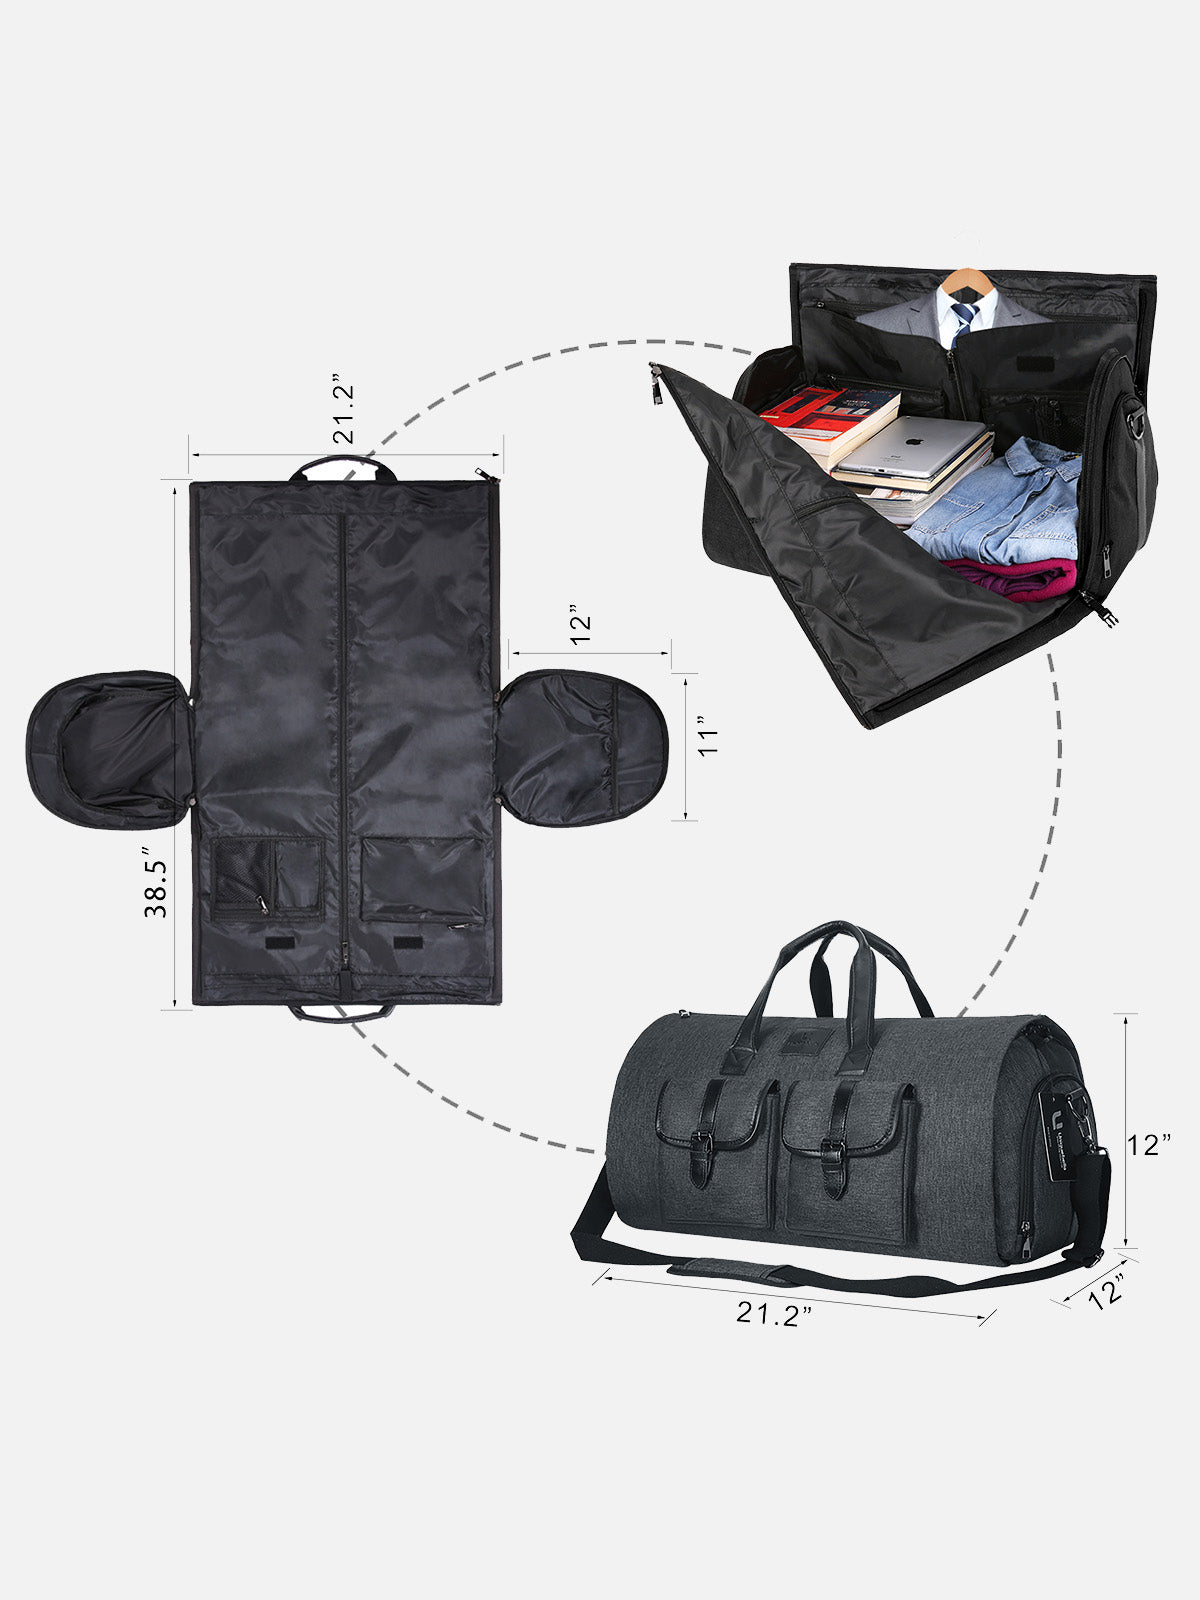 Carry on Garment Bags for Travel Convertible Mens Suit Travel